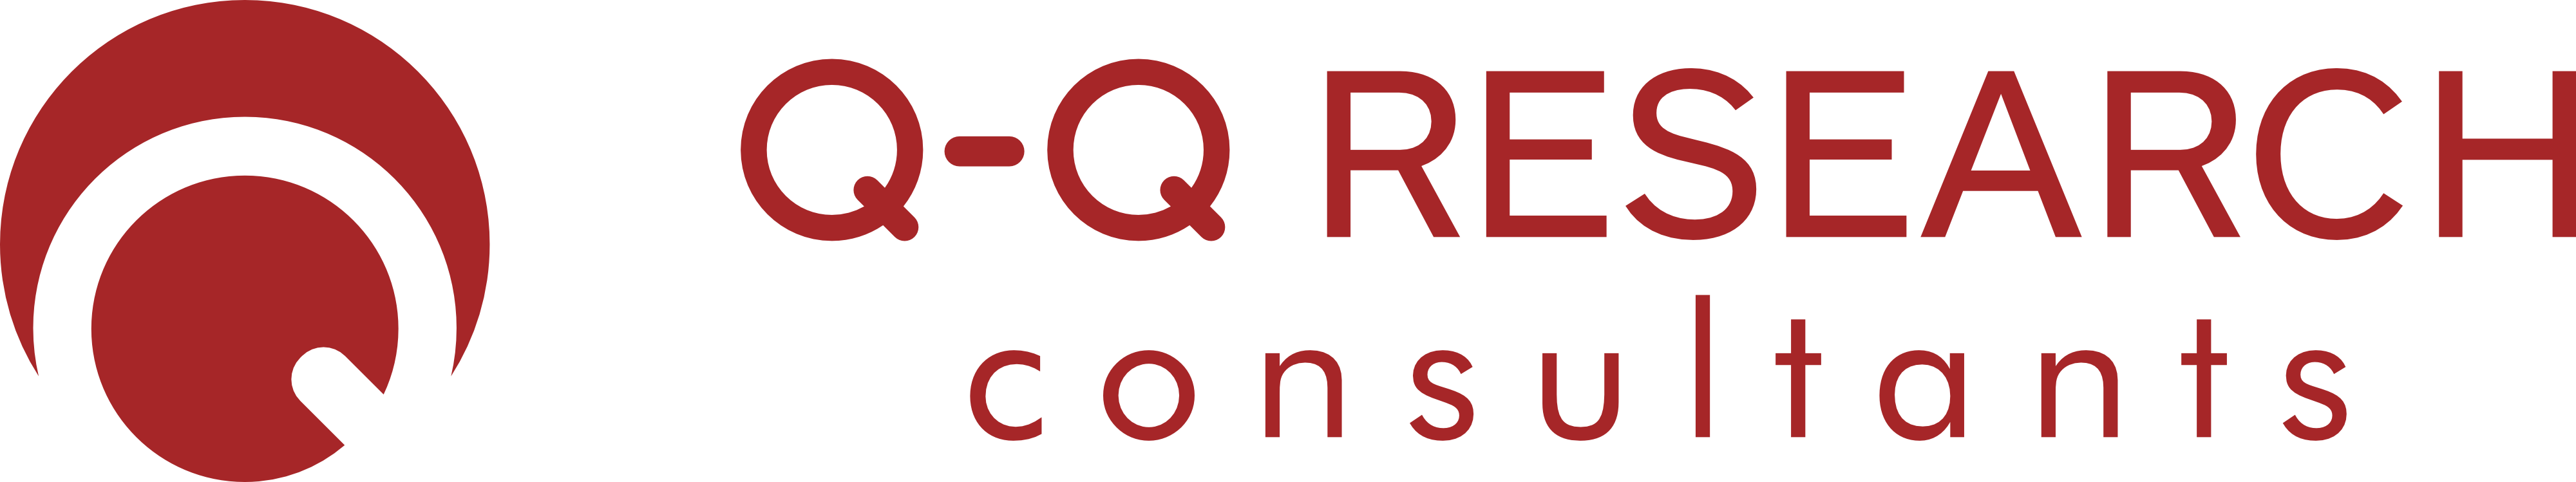 QQ Research Consultants logo